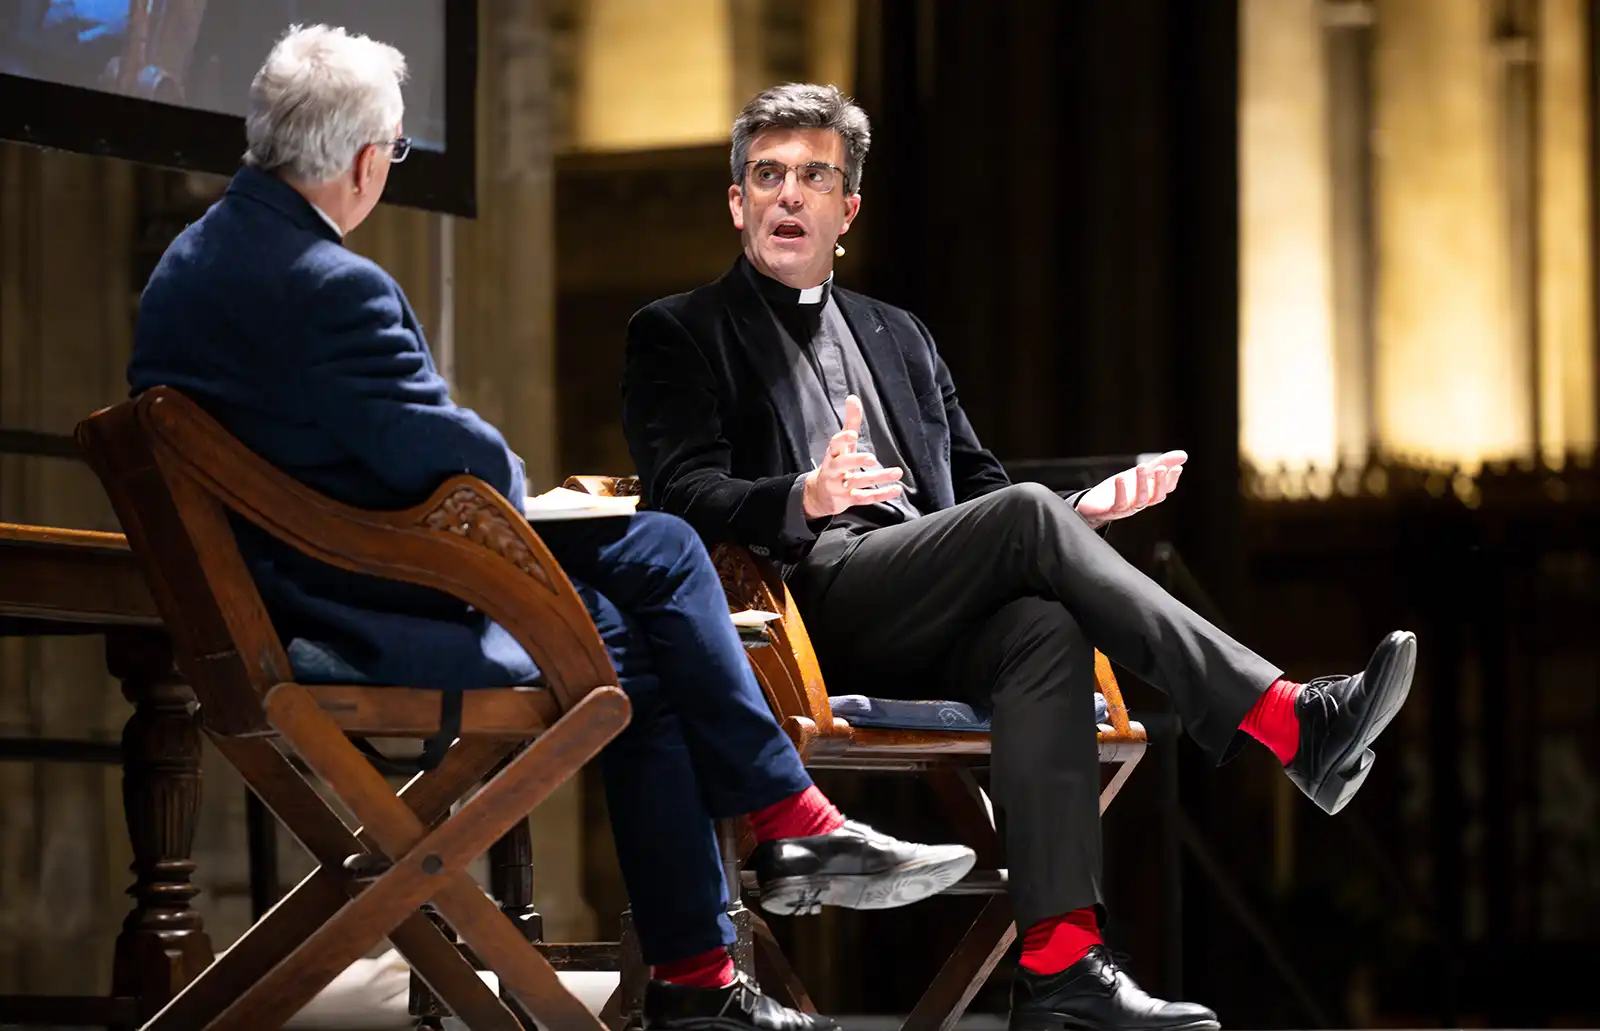 The Dean of Salisbury in conversation with Canon Tim Daykin. Picture: Finnbarr Webster